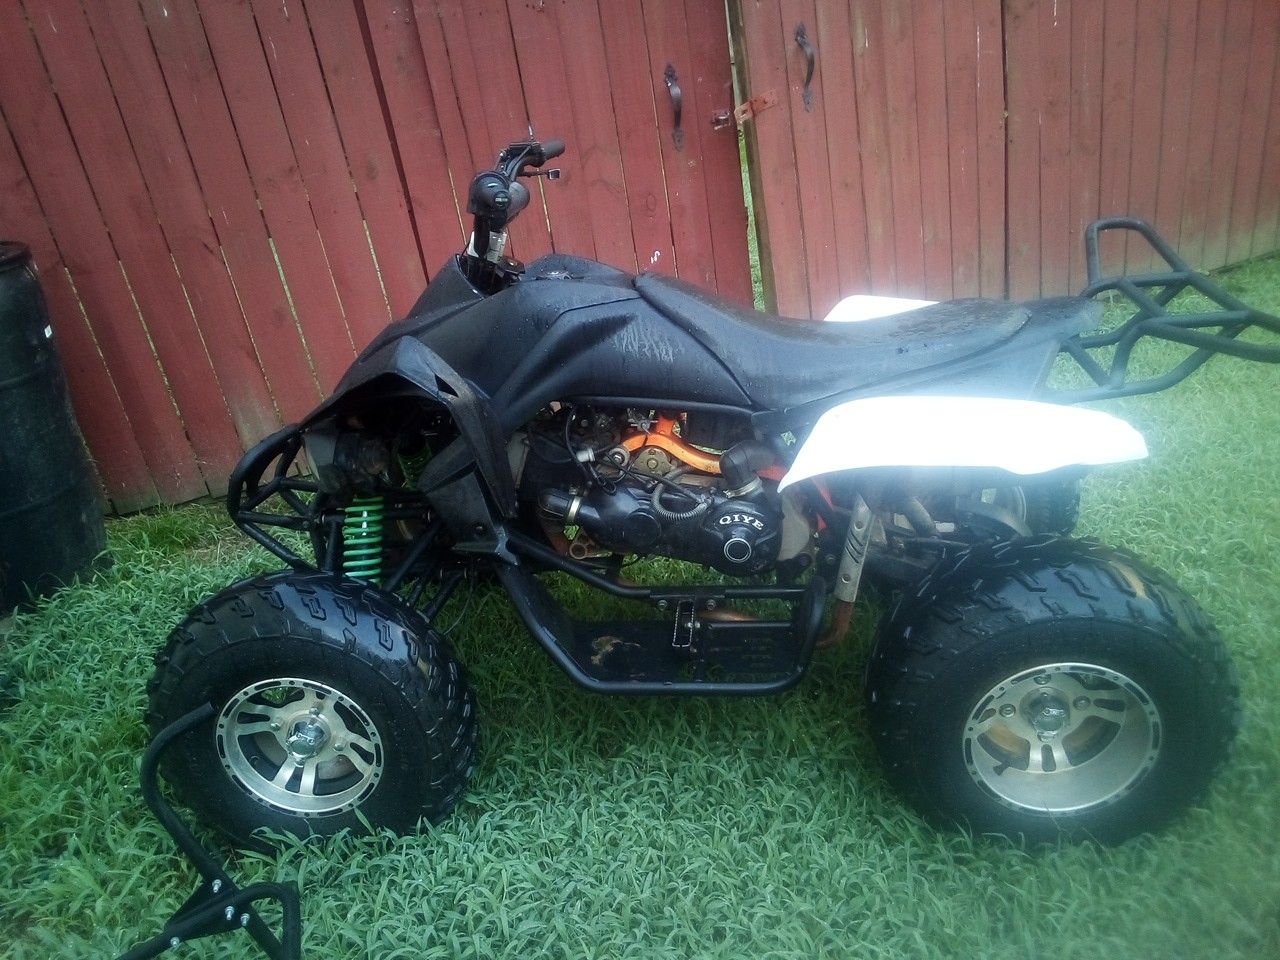 200 cc atv my son lost the key but it starts up very easy and runs perfect